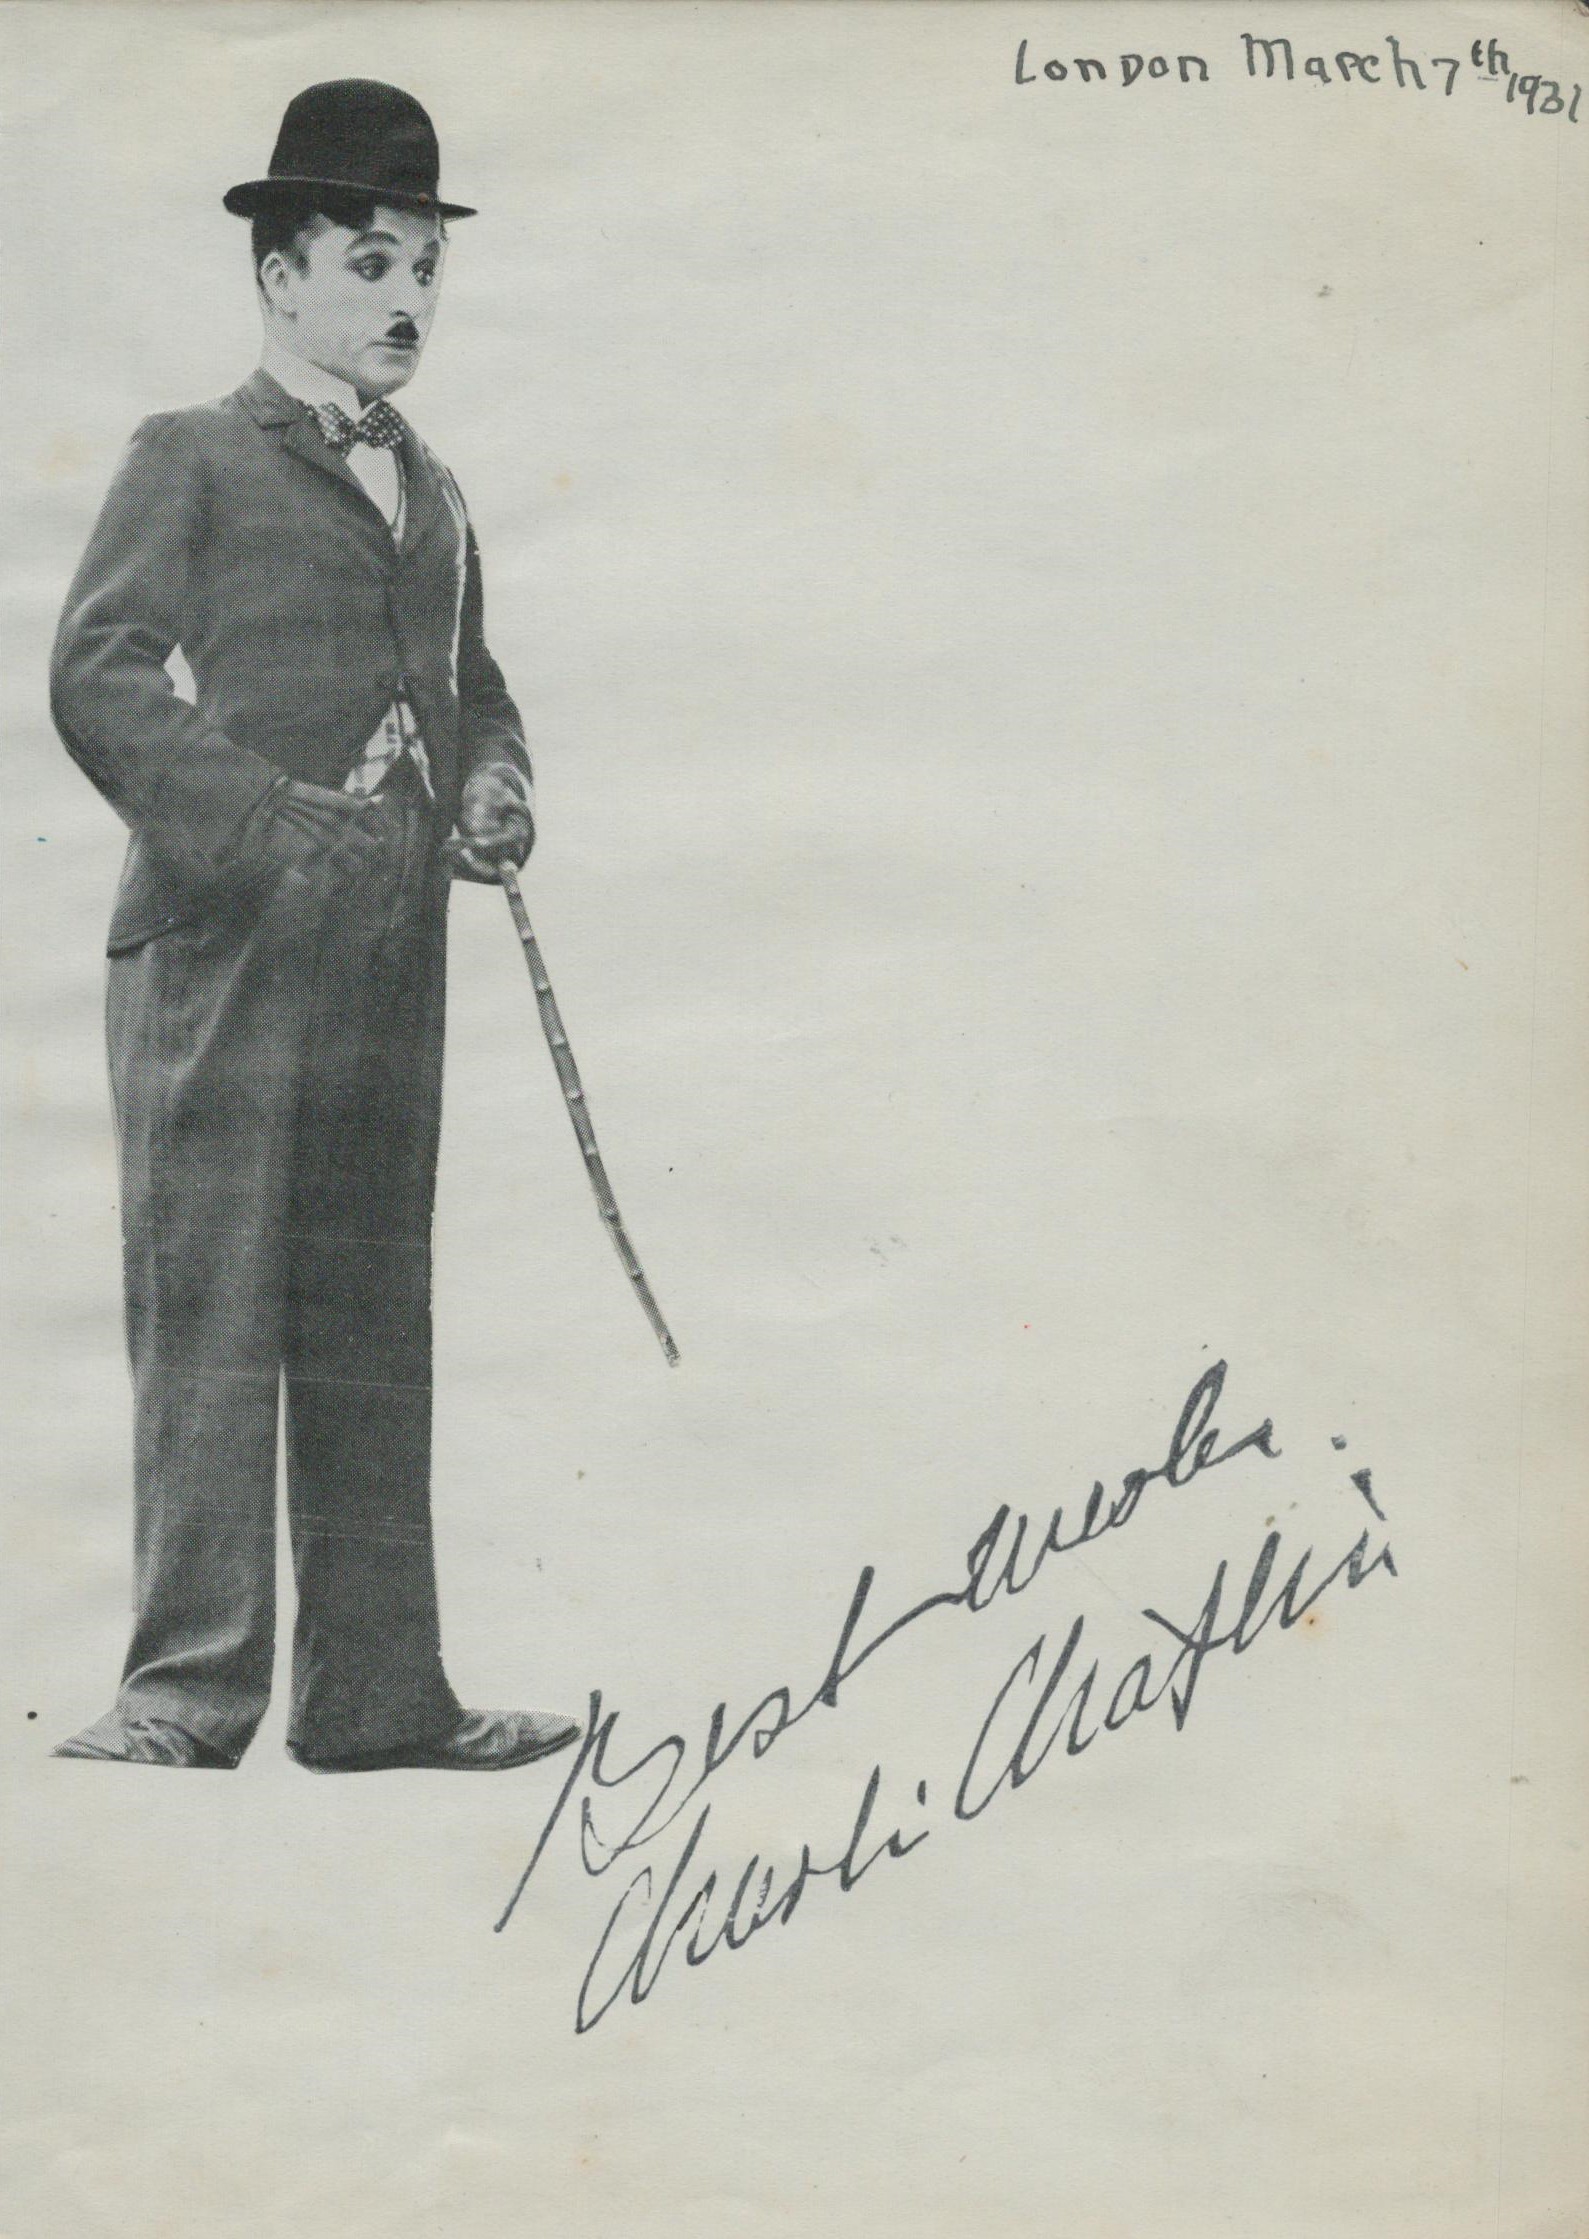 Charlie Chaplin signed 7x5inch black and white illustration/photo. Good Condition. All autographs